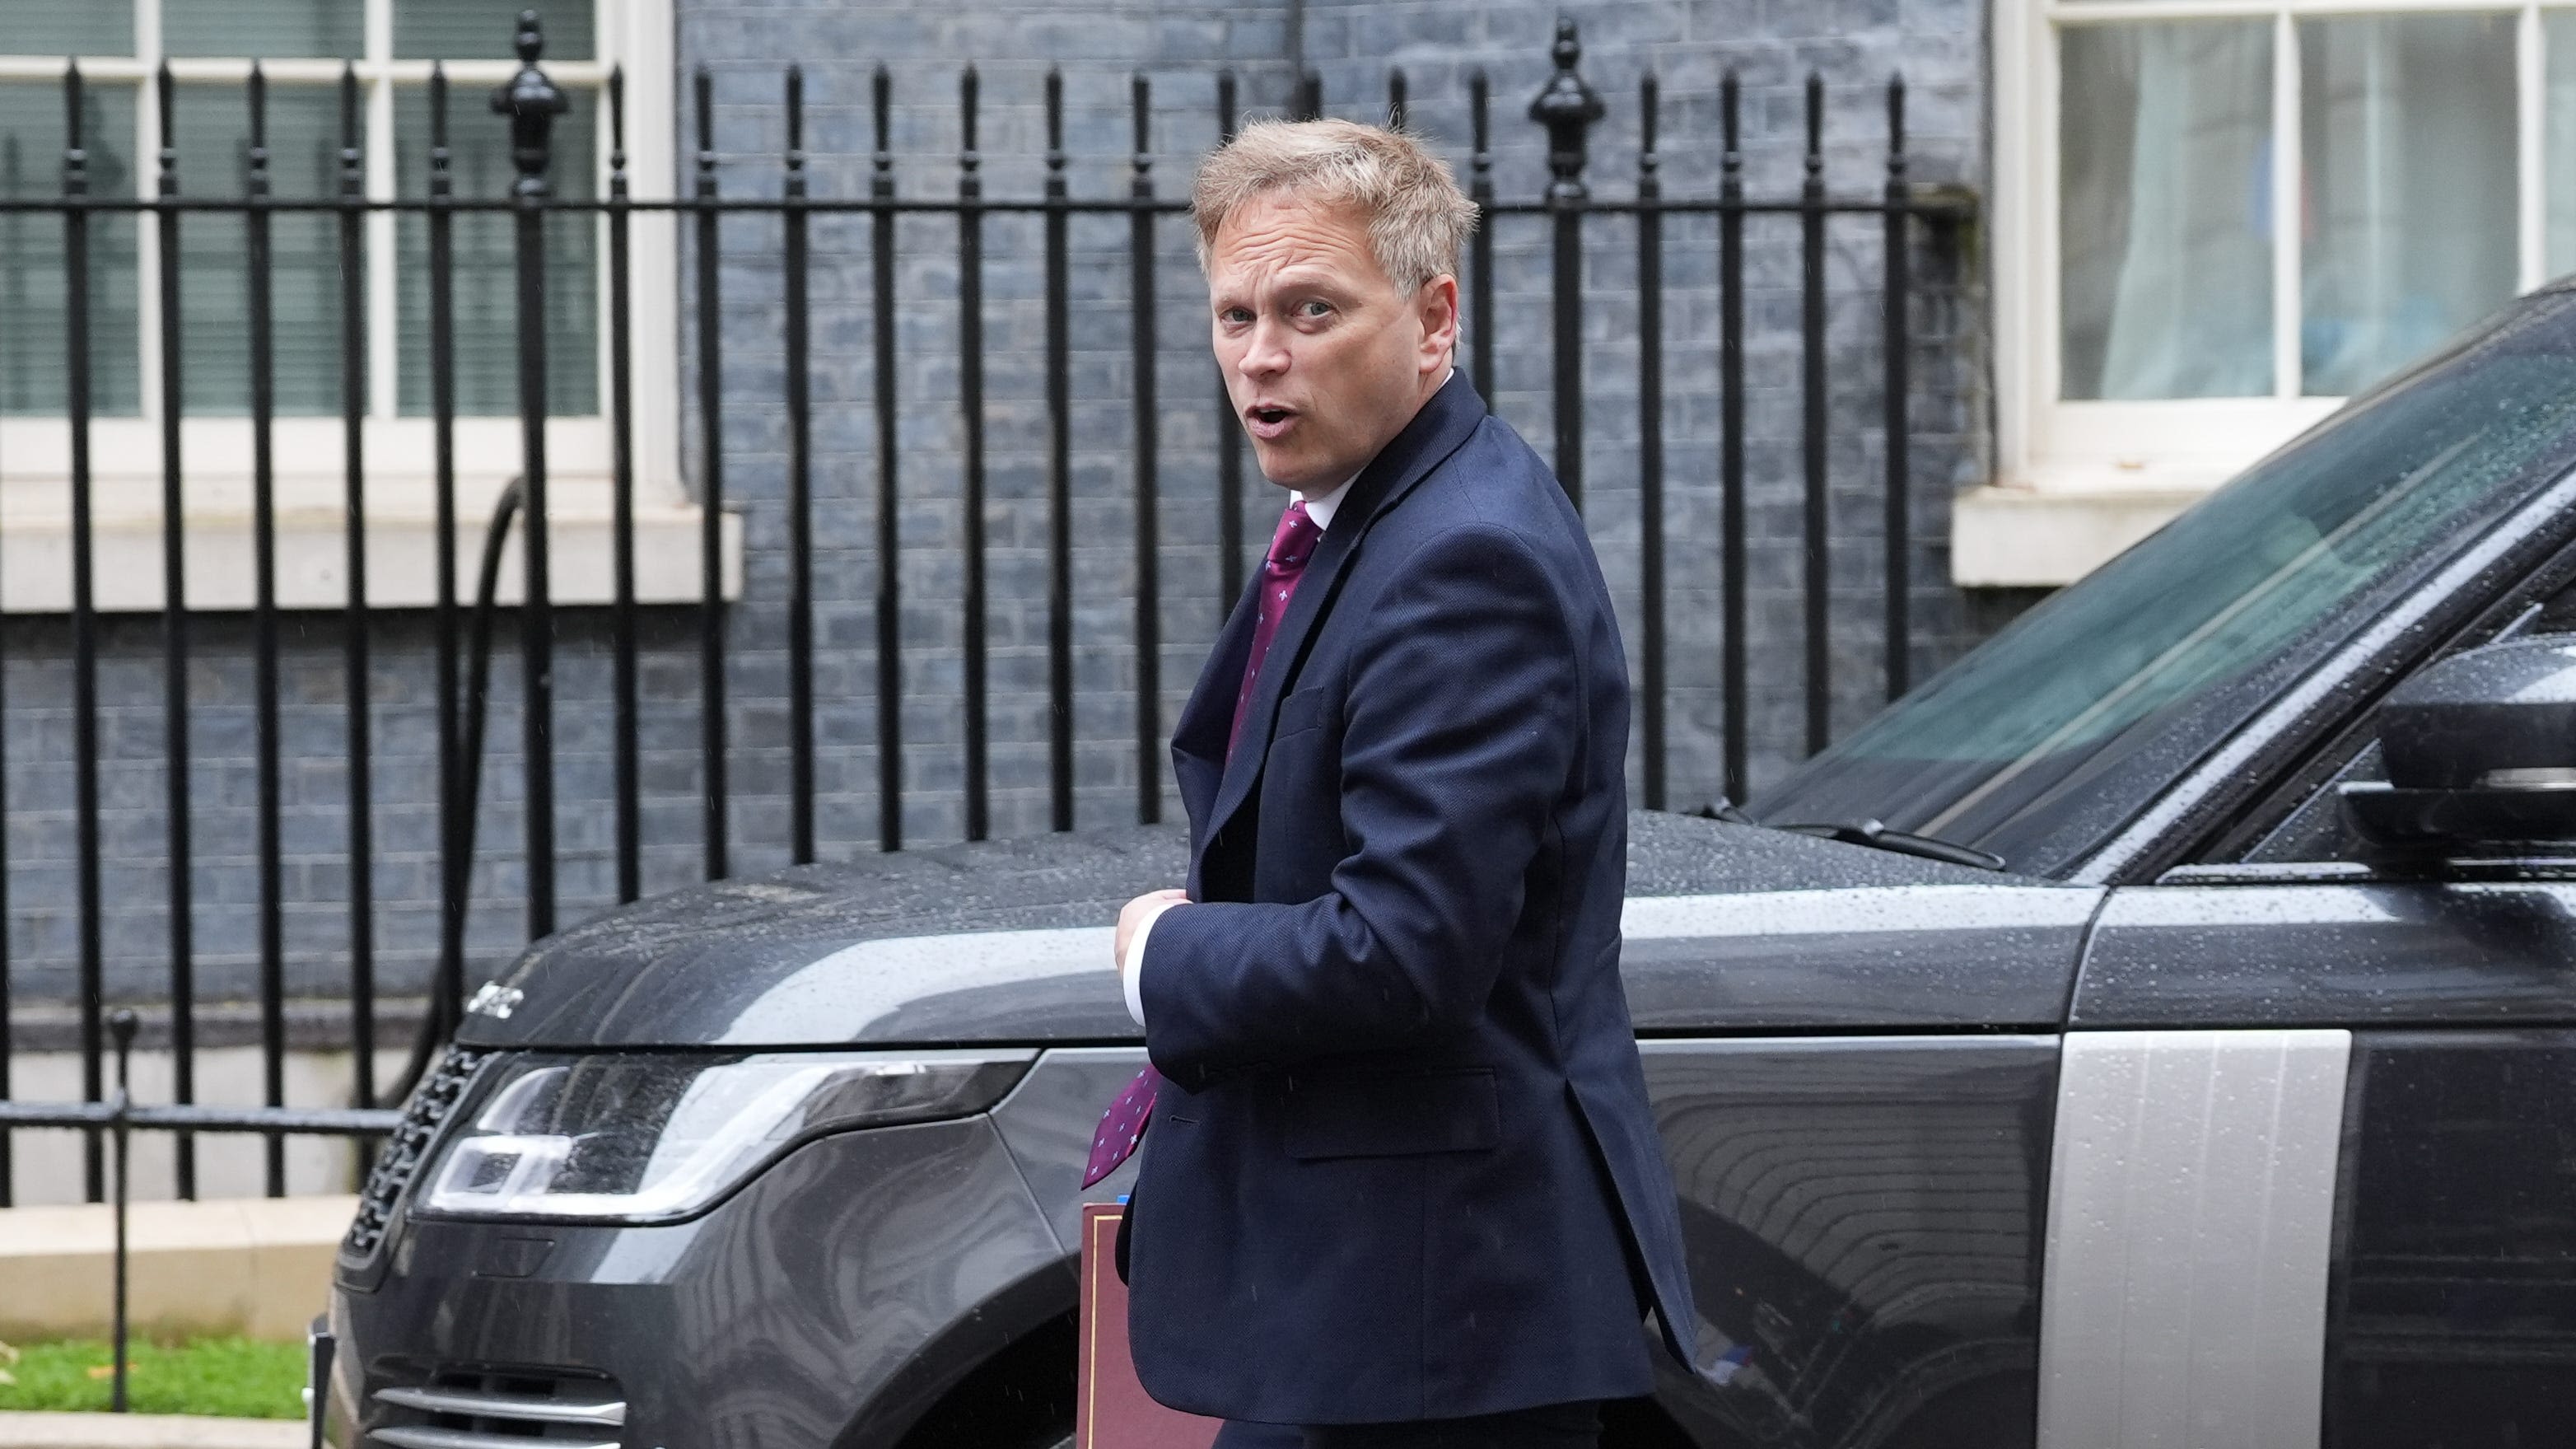 Lethal equipment flown from China to Russia for use in Ukraine, Shapps says